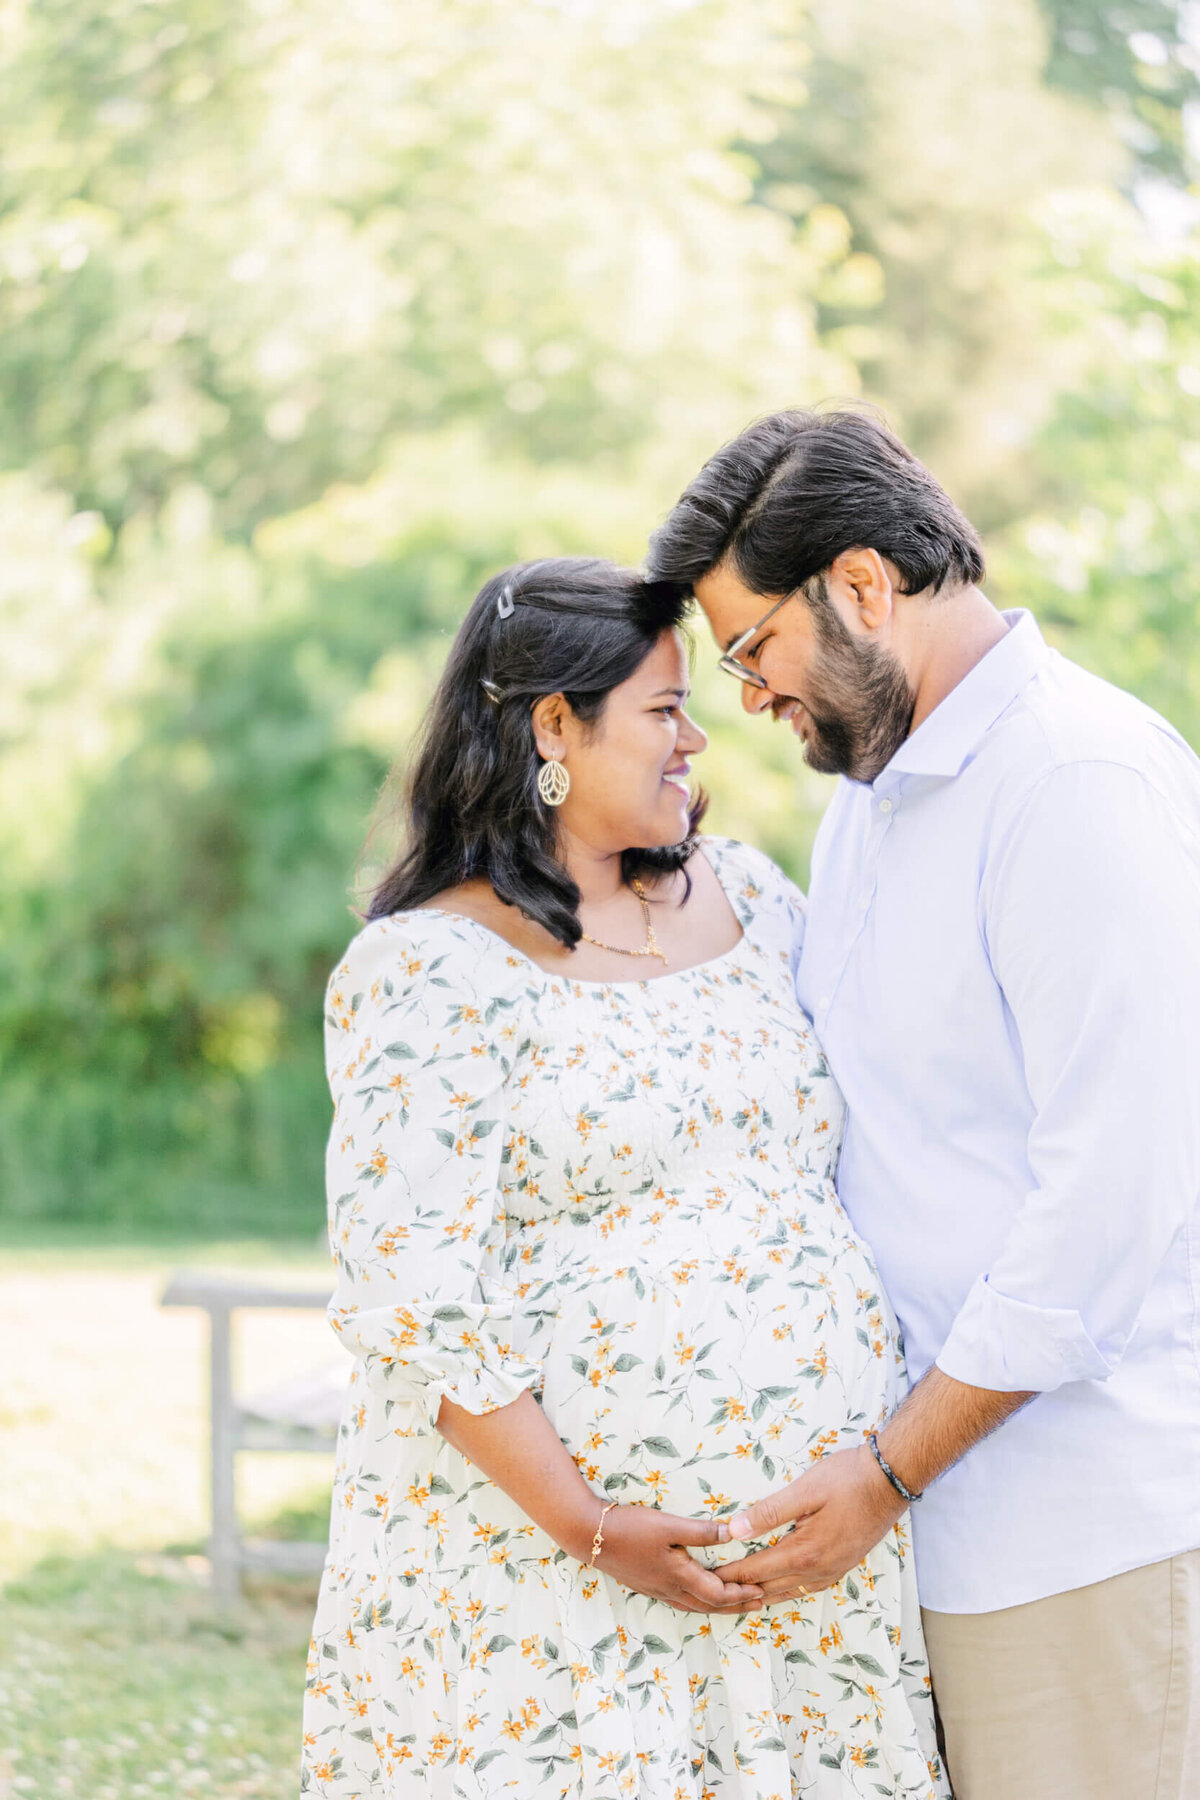 A pregnant woman and her husband smile at each other while holding the baby bump